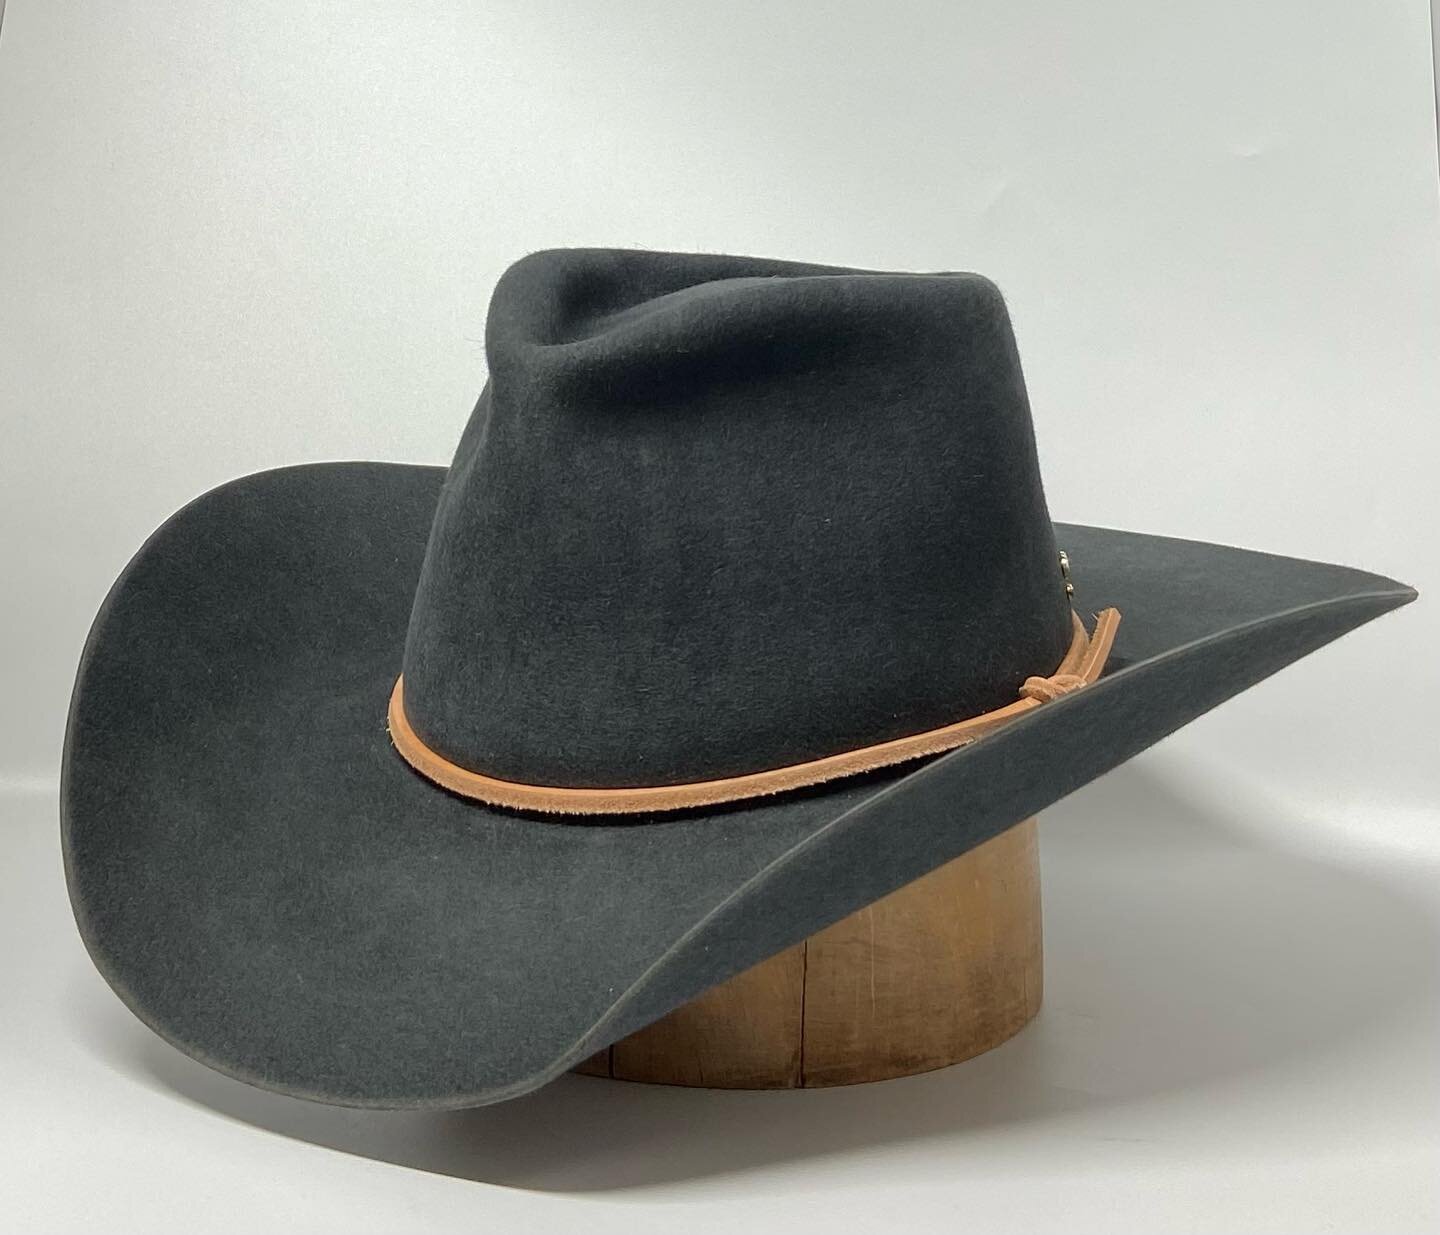 A great example of a steel colored felt. I have one more of these felt bodies left in stock. It can be made into any shape or size! Dm for more info. 

#bowmanhatco